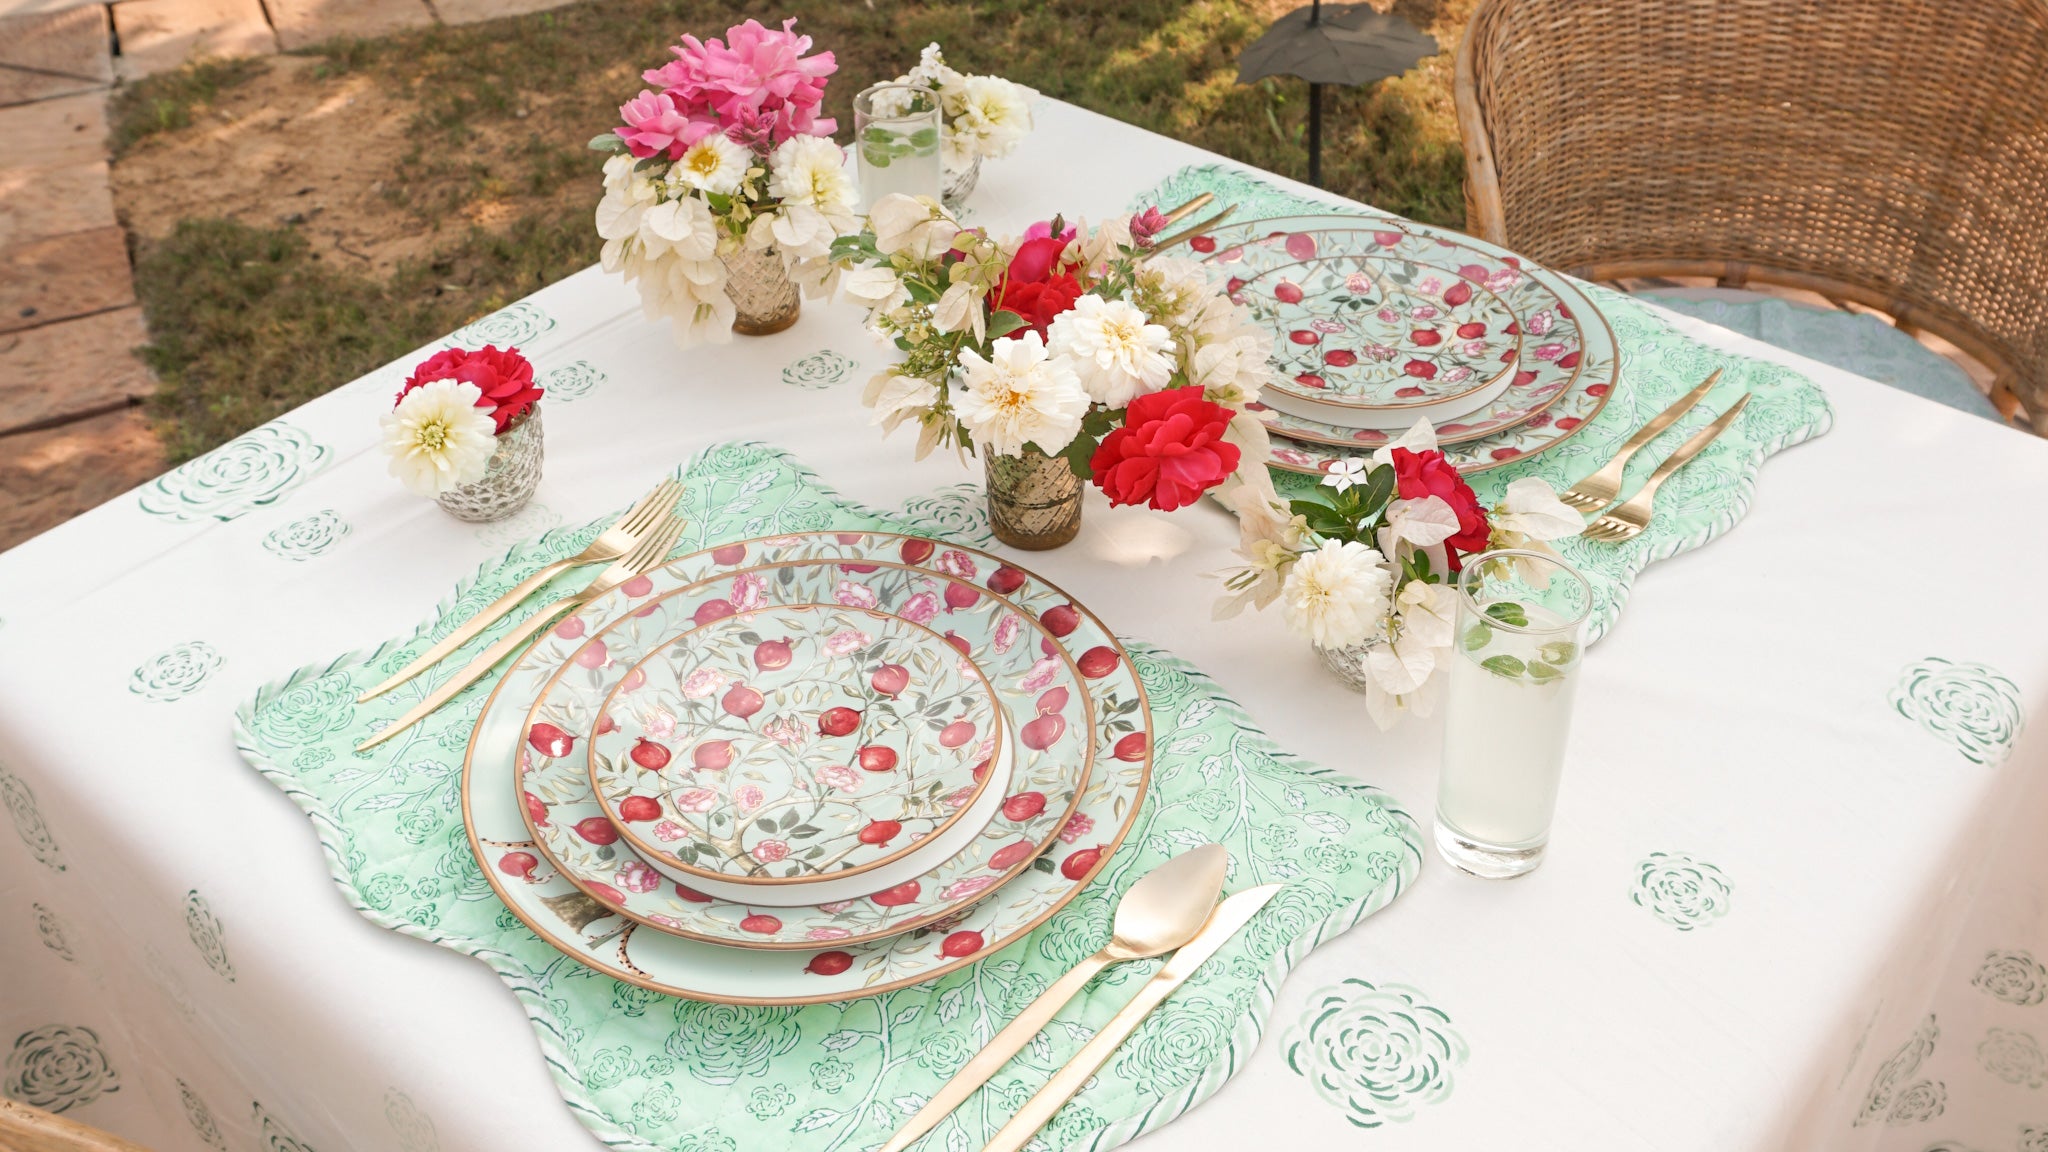 Rose Garden block printed quilted placemats on white rose tablecloth